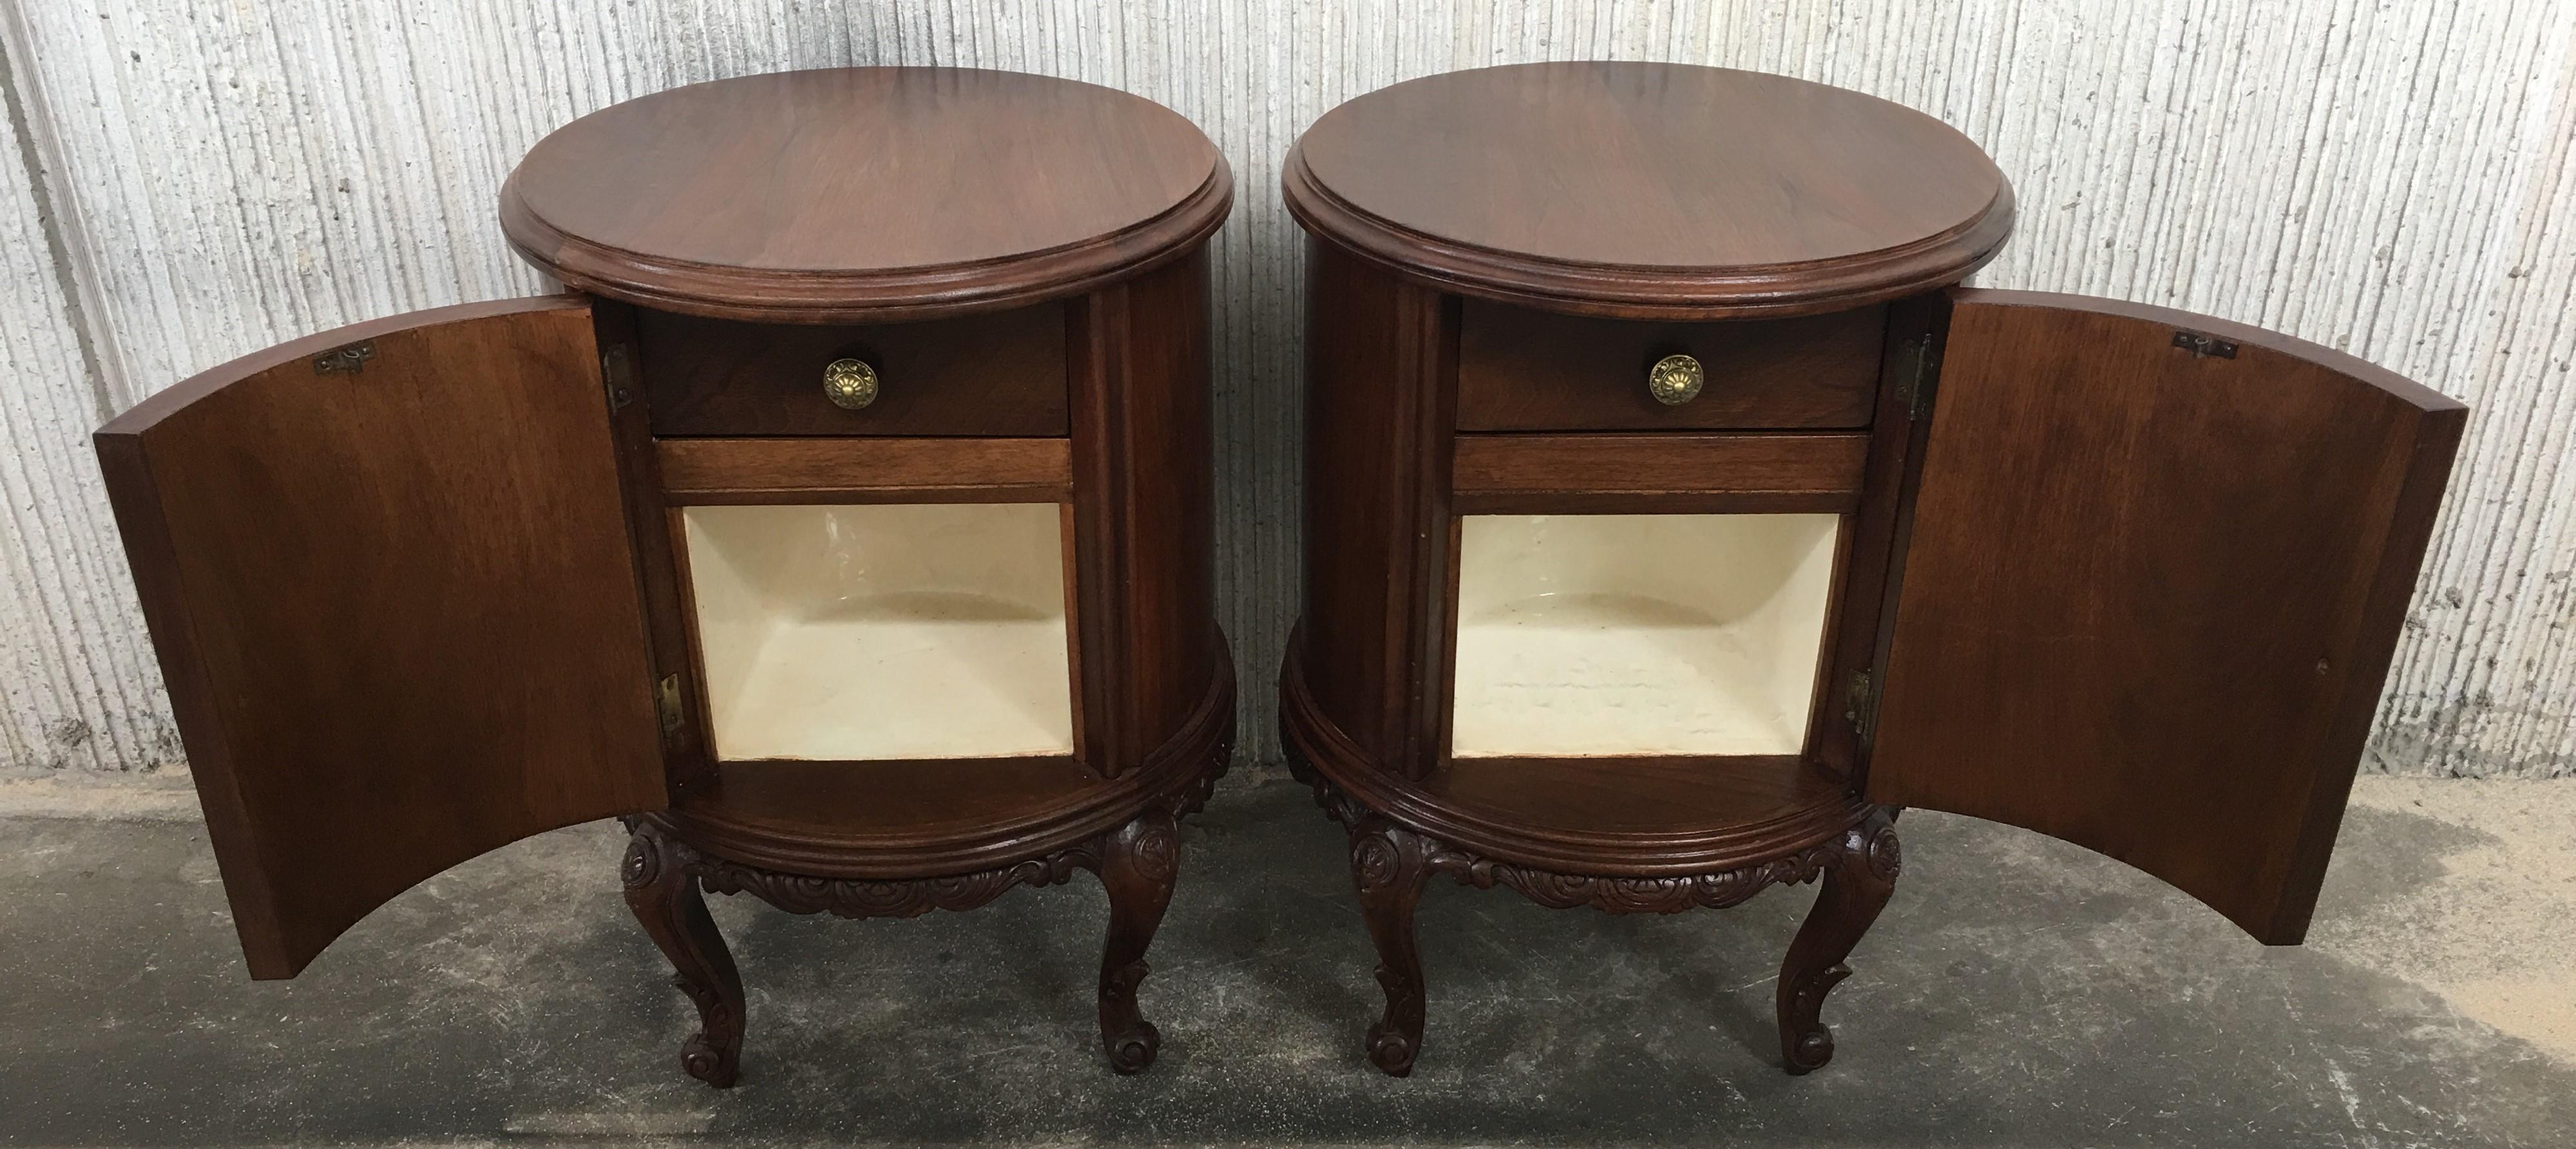 20th century pair of Art Deco nightstands with door and one hidden drawer

We are proud to offer you these top-quality masterpieces from the heydays of the Art Deco period. The combination of the incredibly stylish lines in the design and the